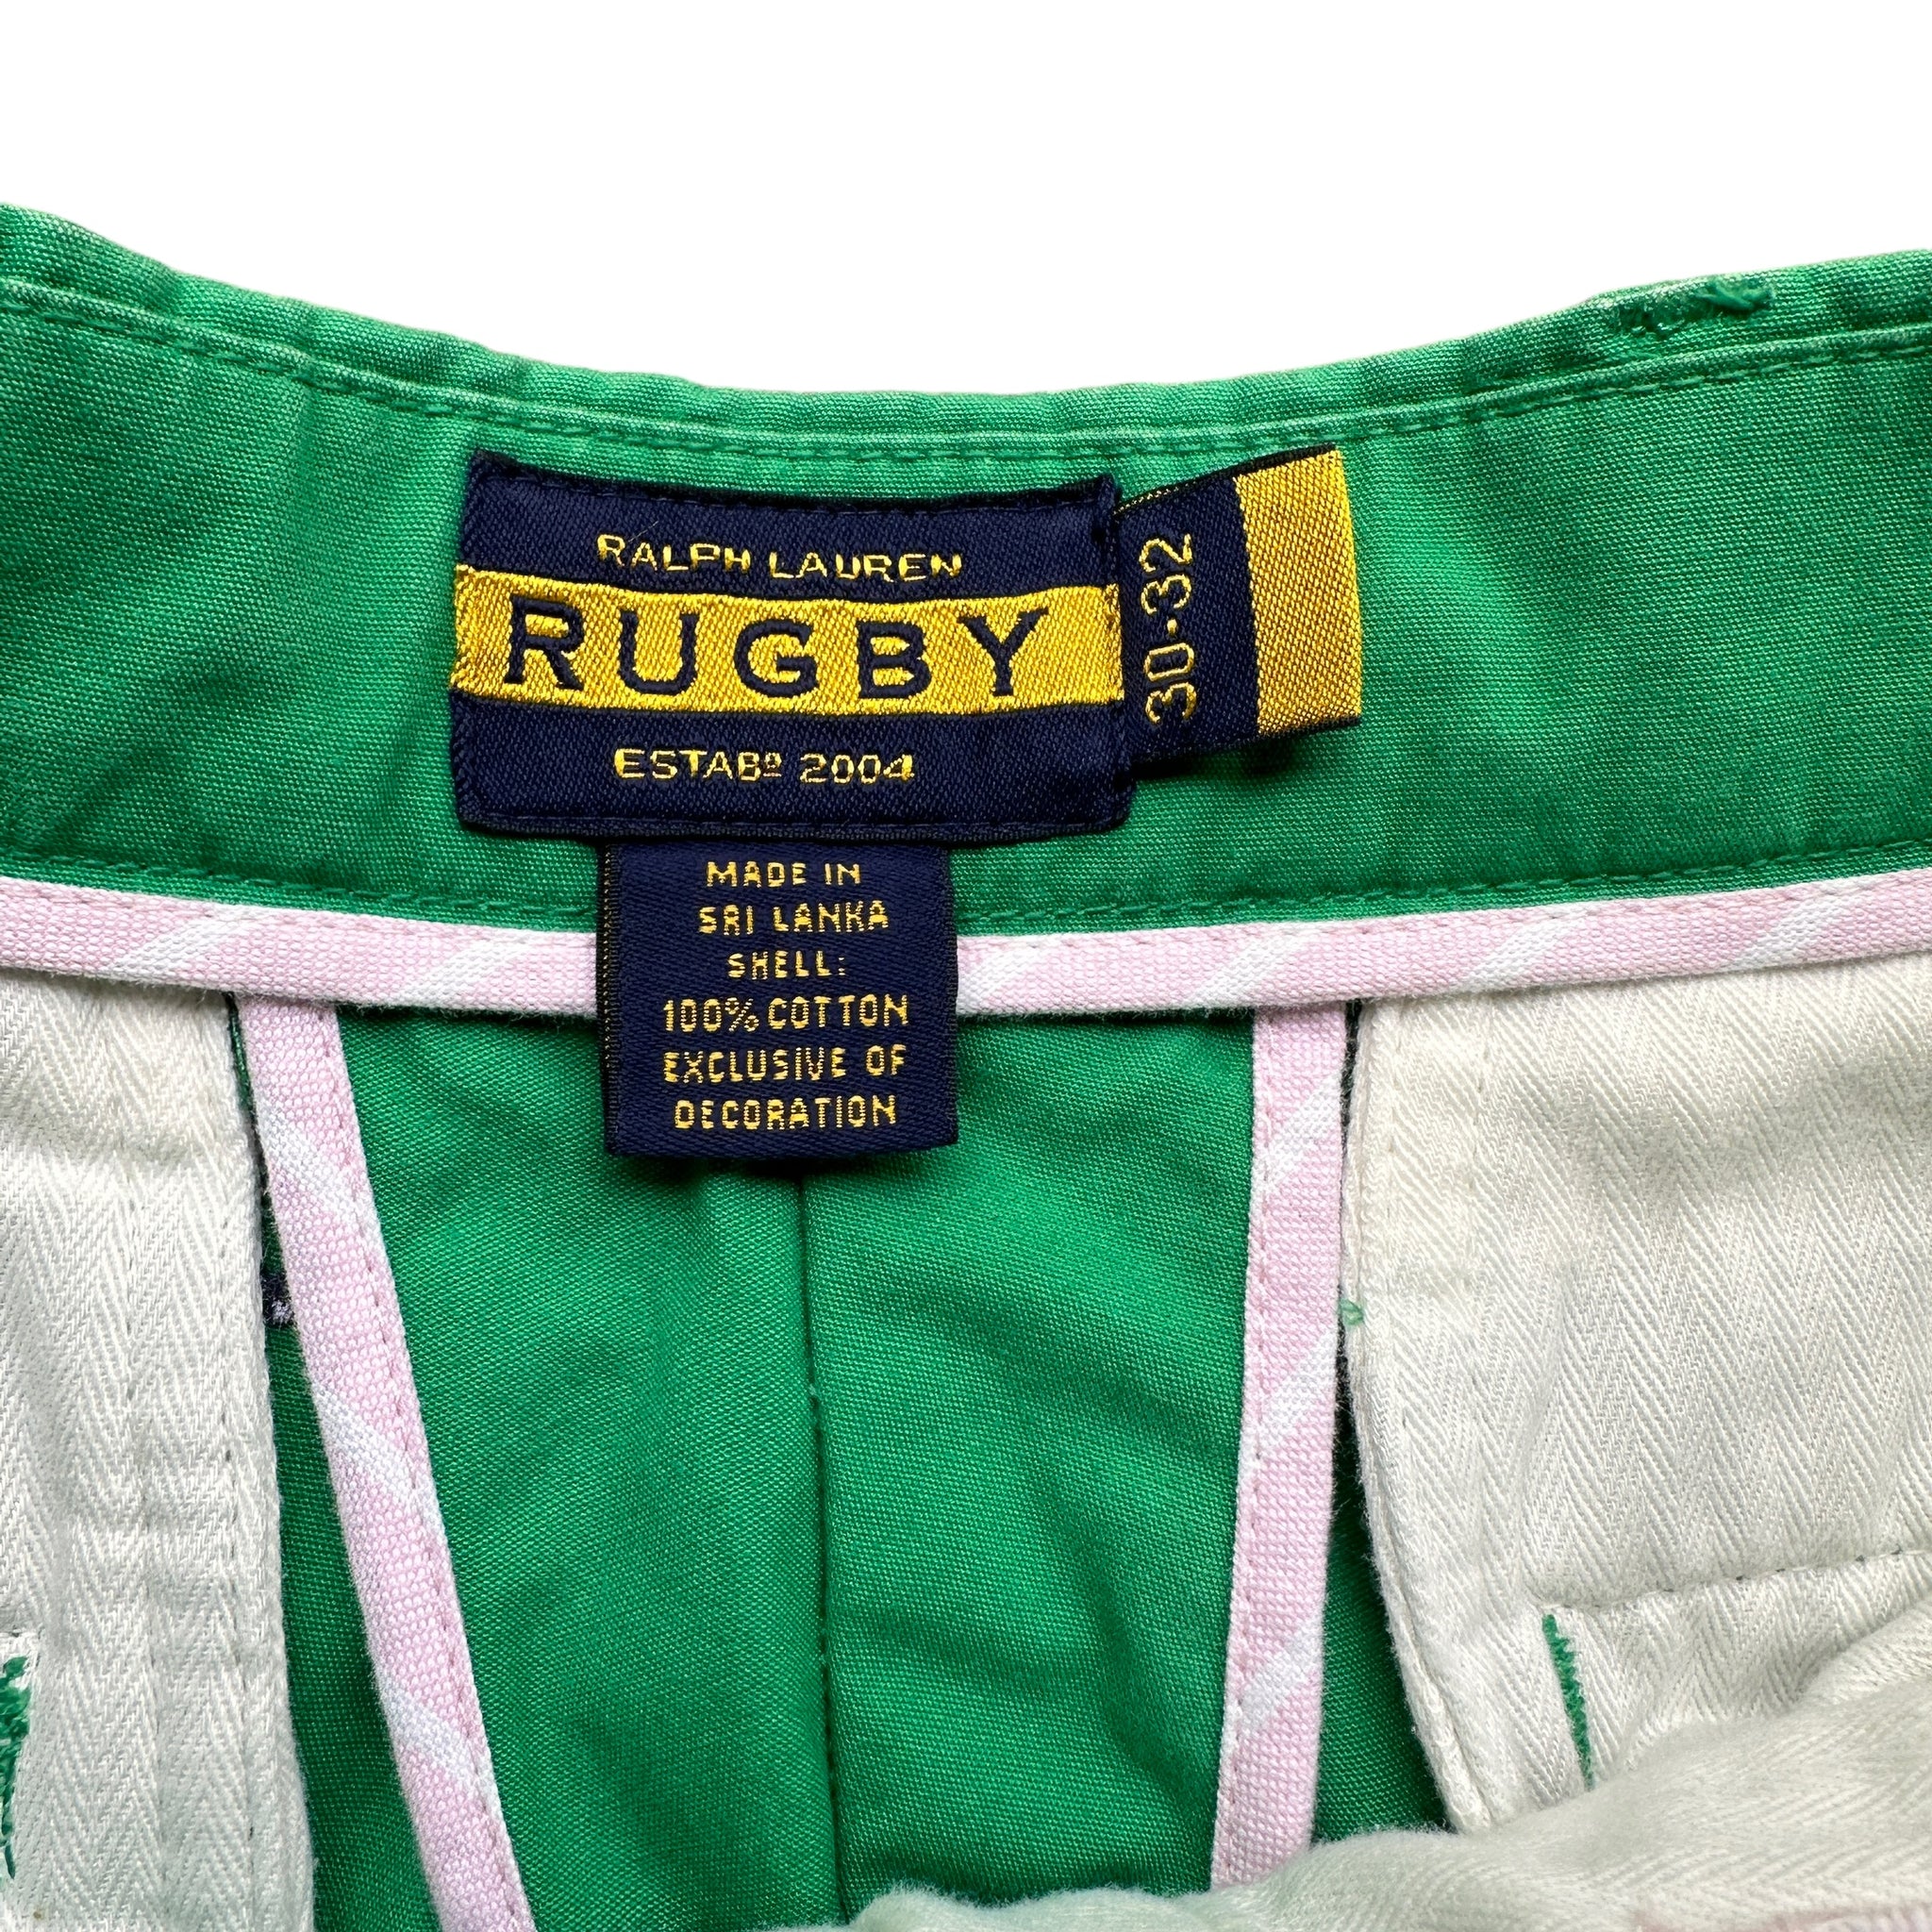 Rugby Ralph lauren rugby player pants 30/32